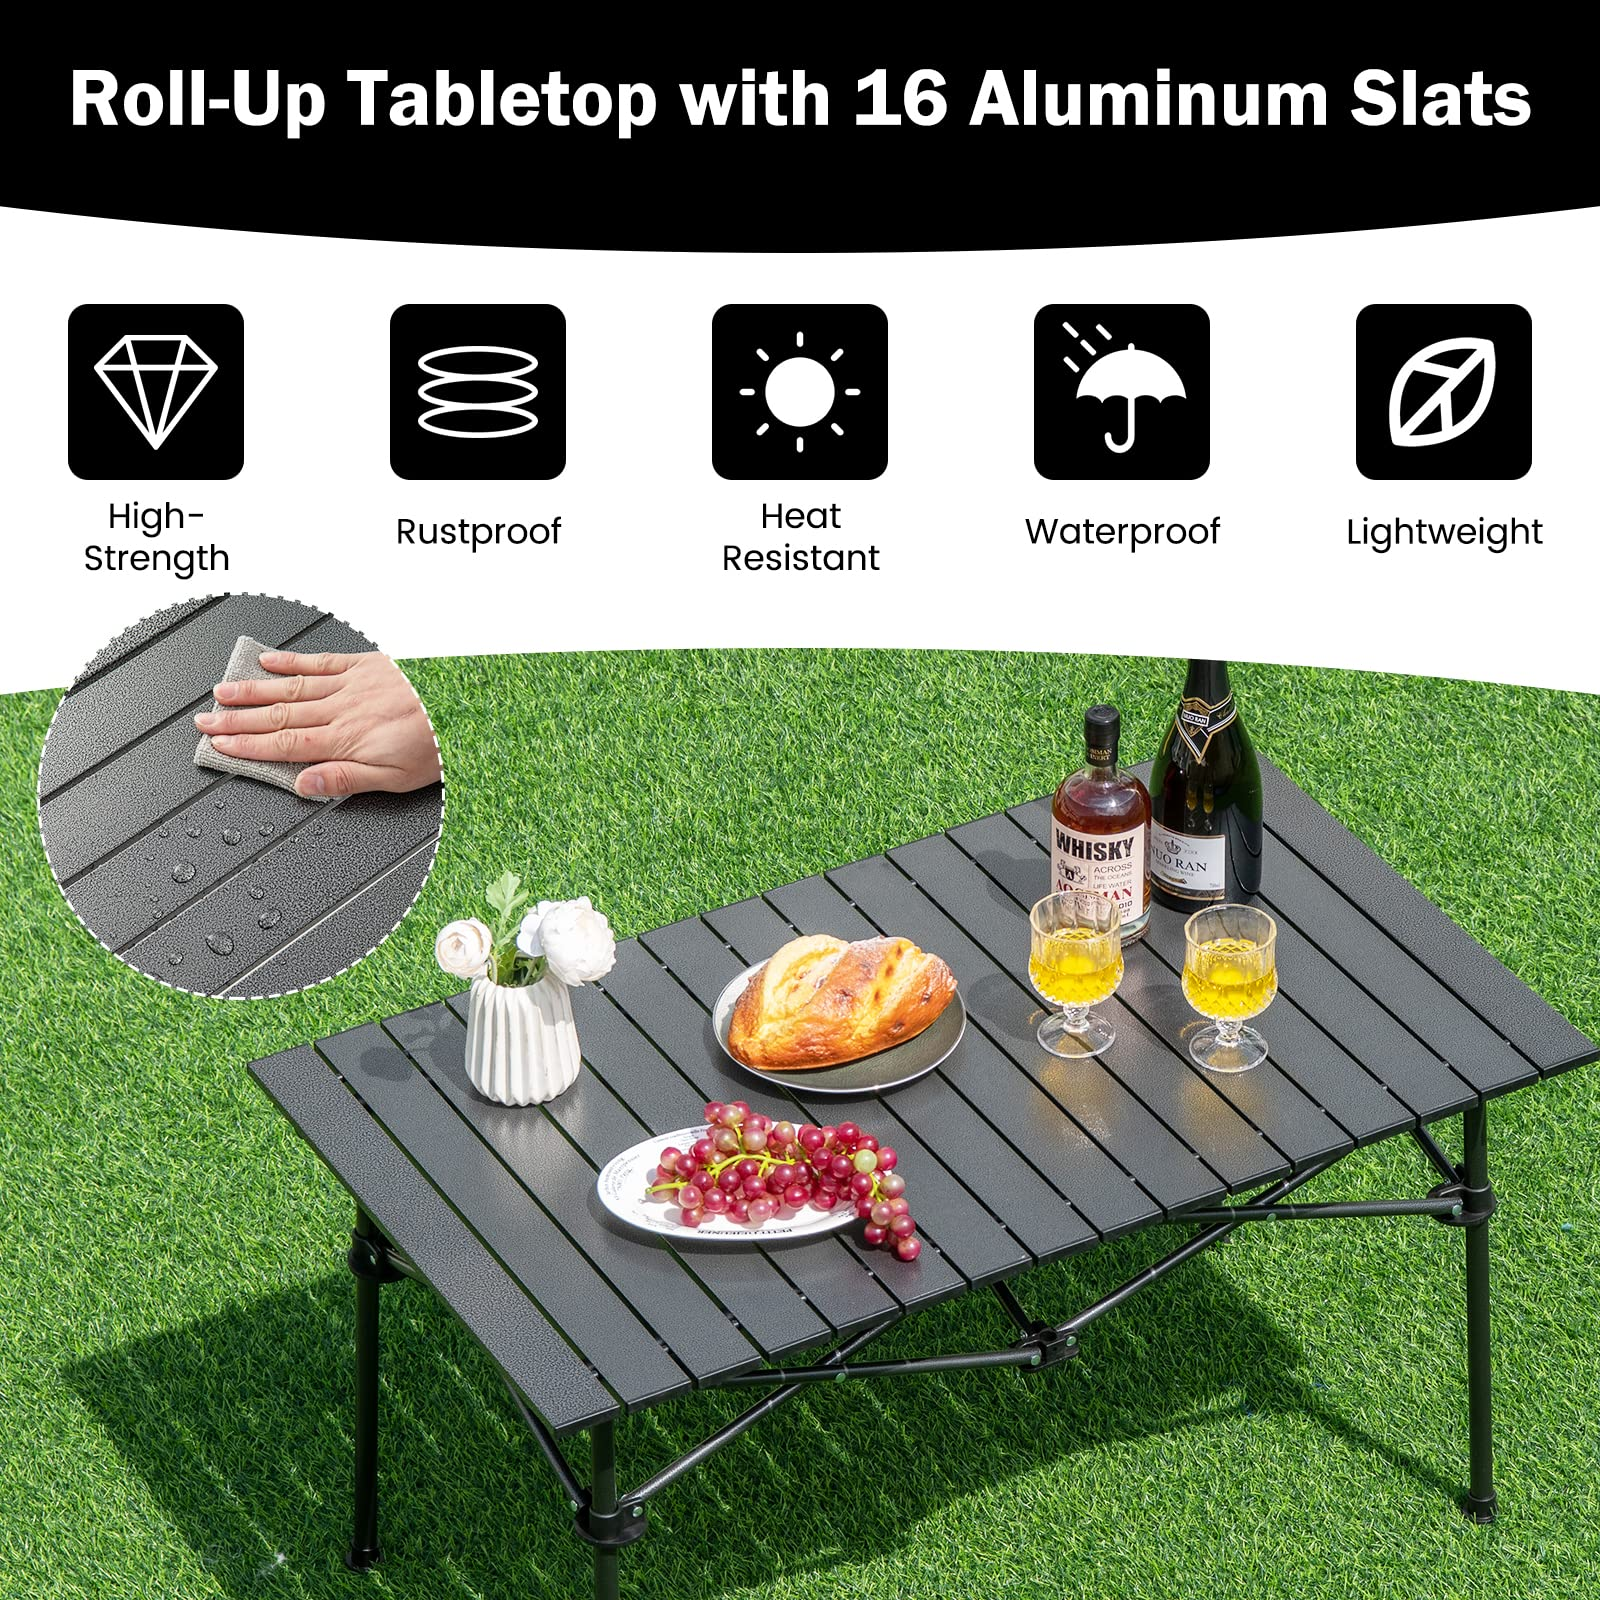 Giantex Folding Camping Table for 4-6 People, Roll-Up Lightweight Picnic Table with Large Aluminum Tabletop & Carrying Bag (Black)